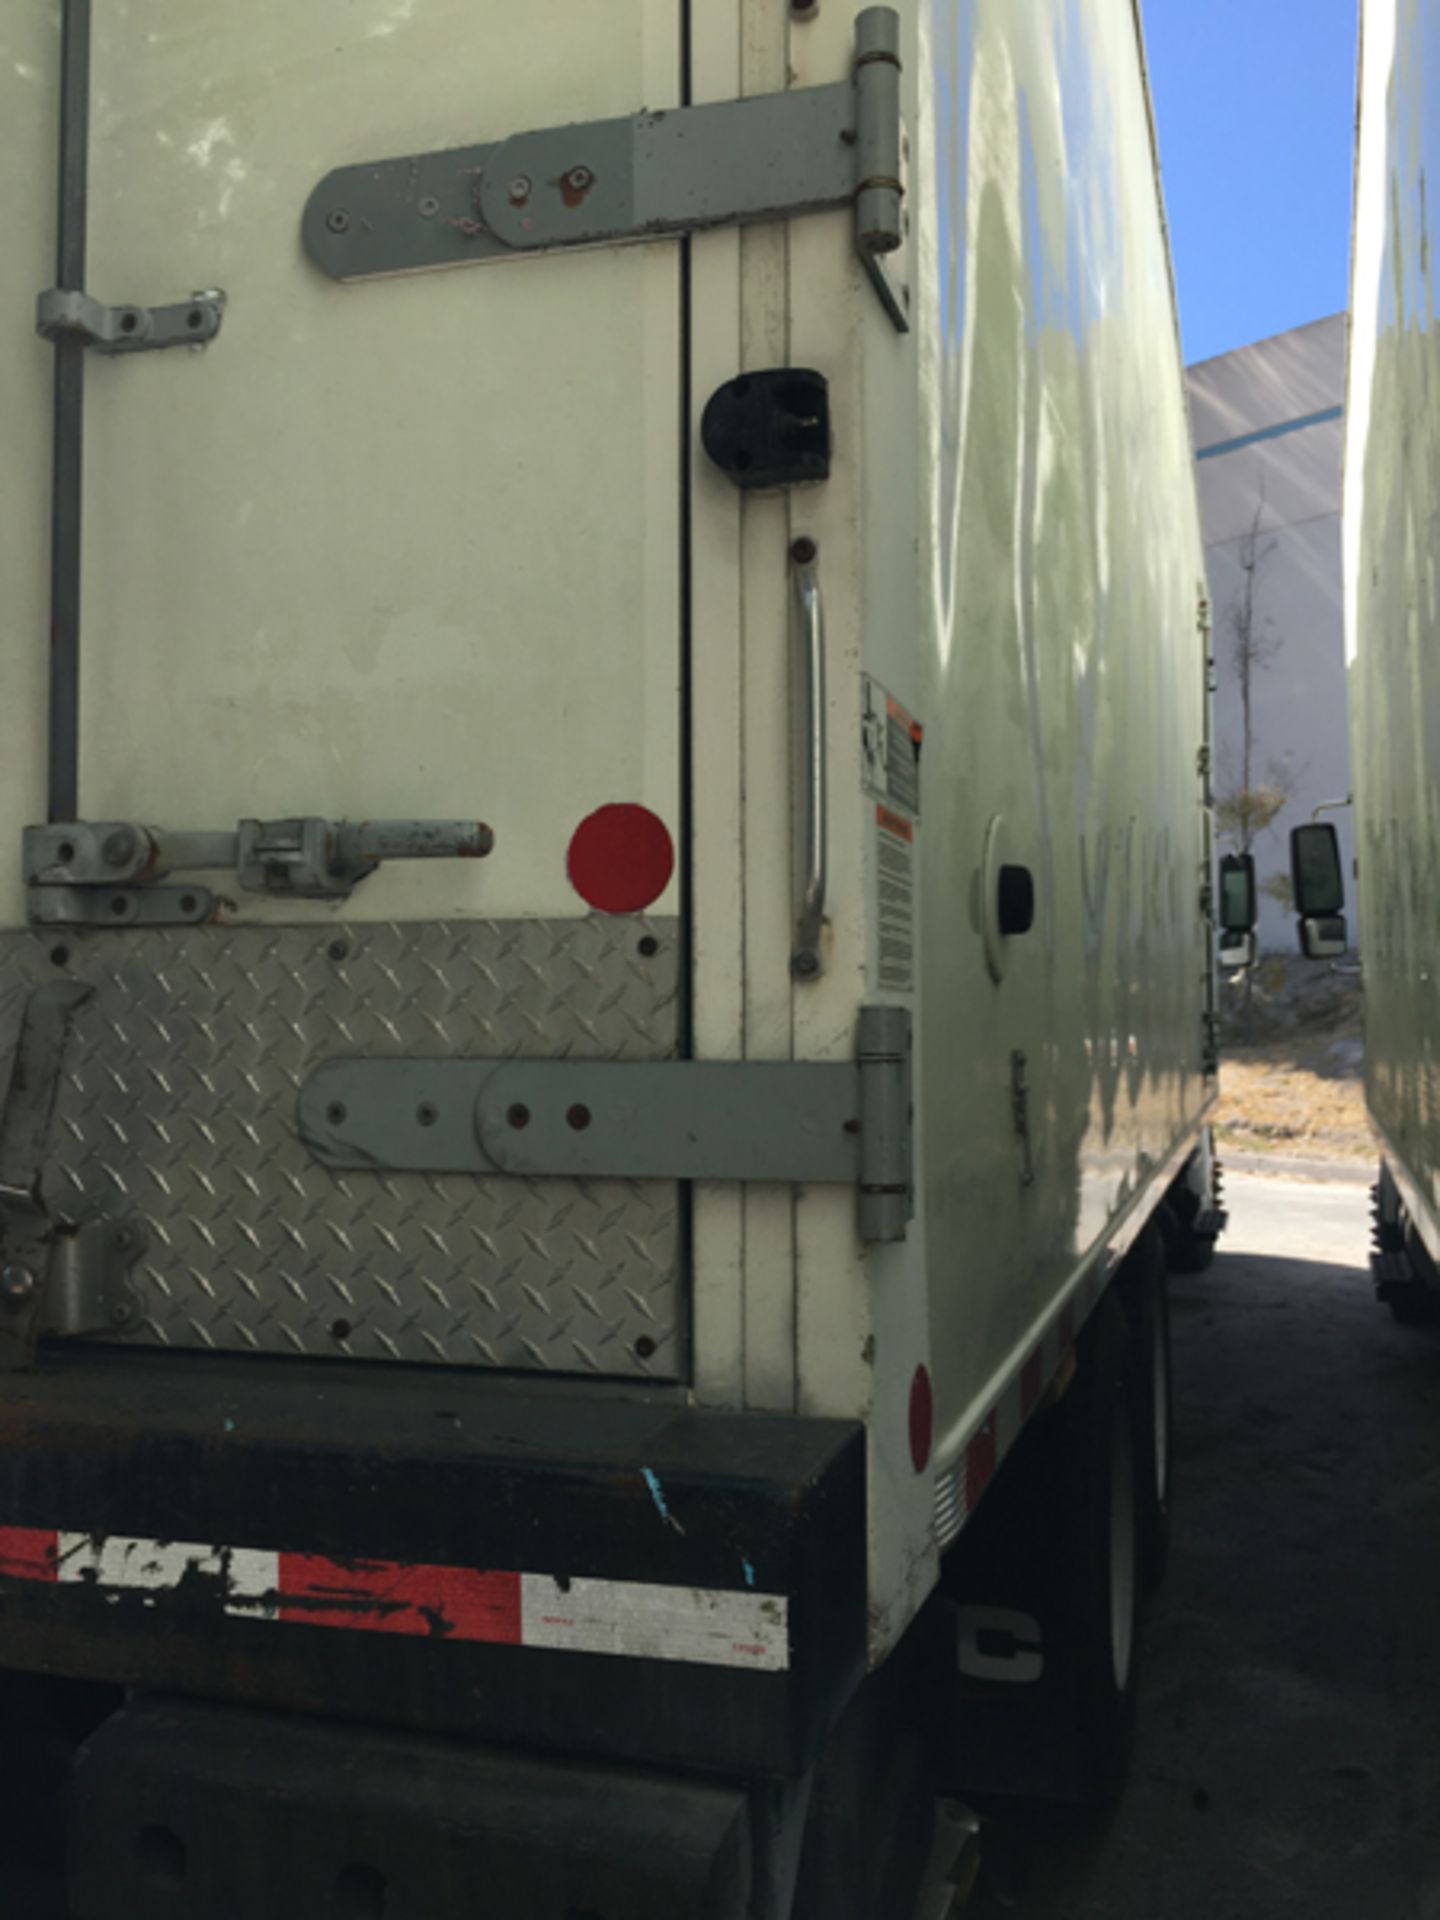 2018 INTERNATIONAL 4400 SBA 6X4 REFRIGERATED BOX TRUCK VIN#: 1HTMSTAR1JH529960, Approx Miles: 53120, - Image 5 of 8